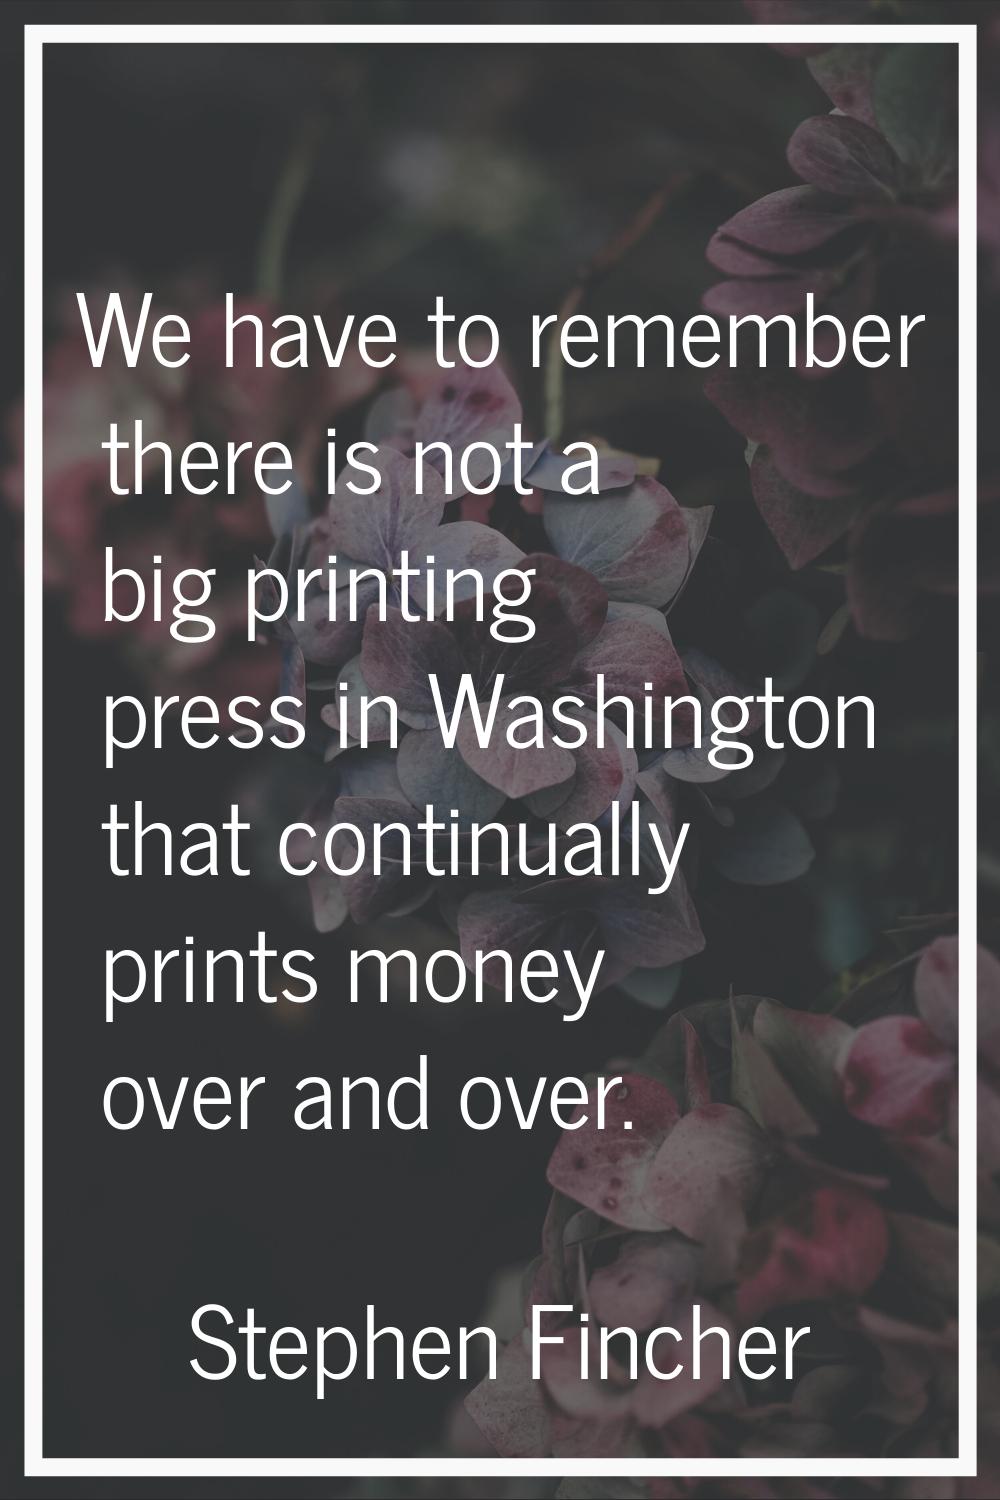 We have to remember there is not a big printing press in Washington that continually prints money o